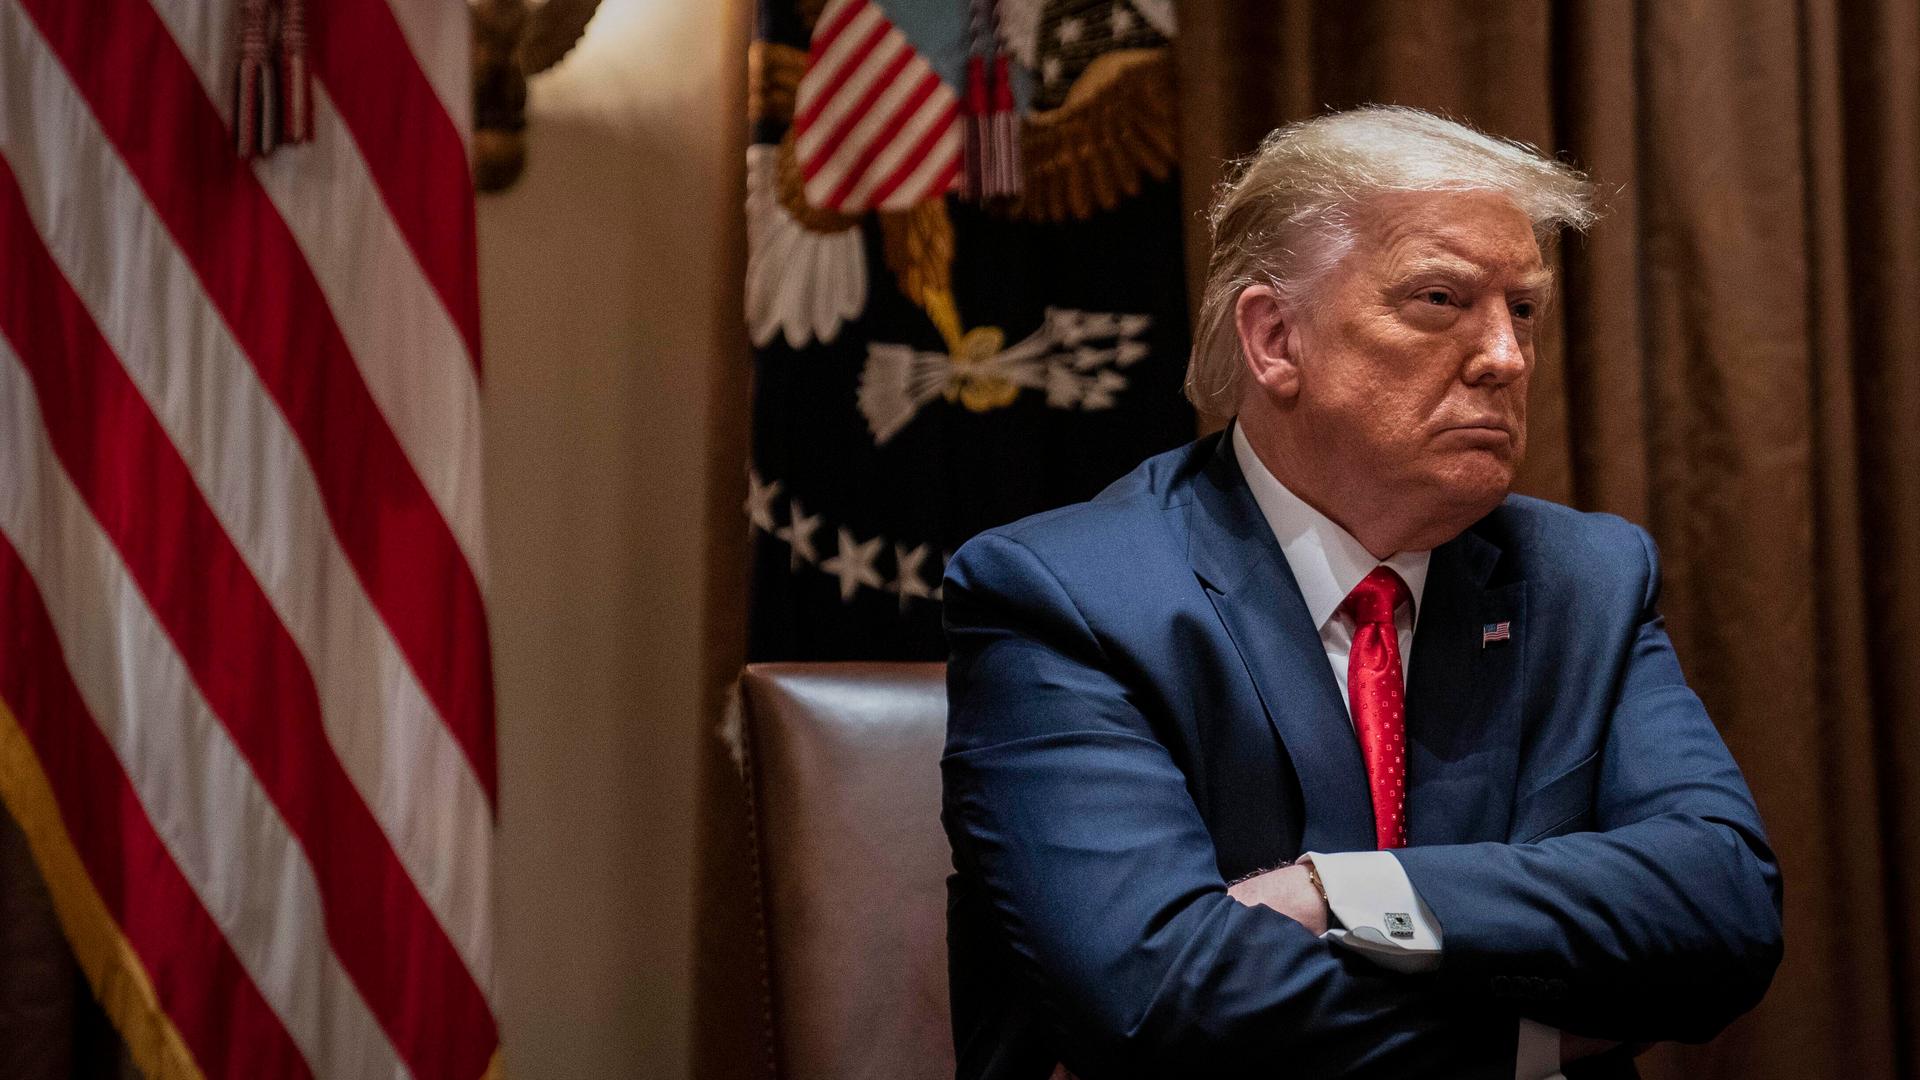 President Donald Trump crosses his arms as he listens during a White House meeting with Hispanic leaders, July 9, 2020, in Washington, DC.